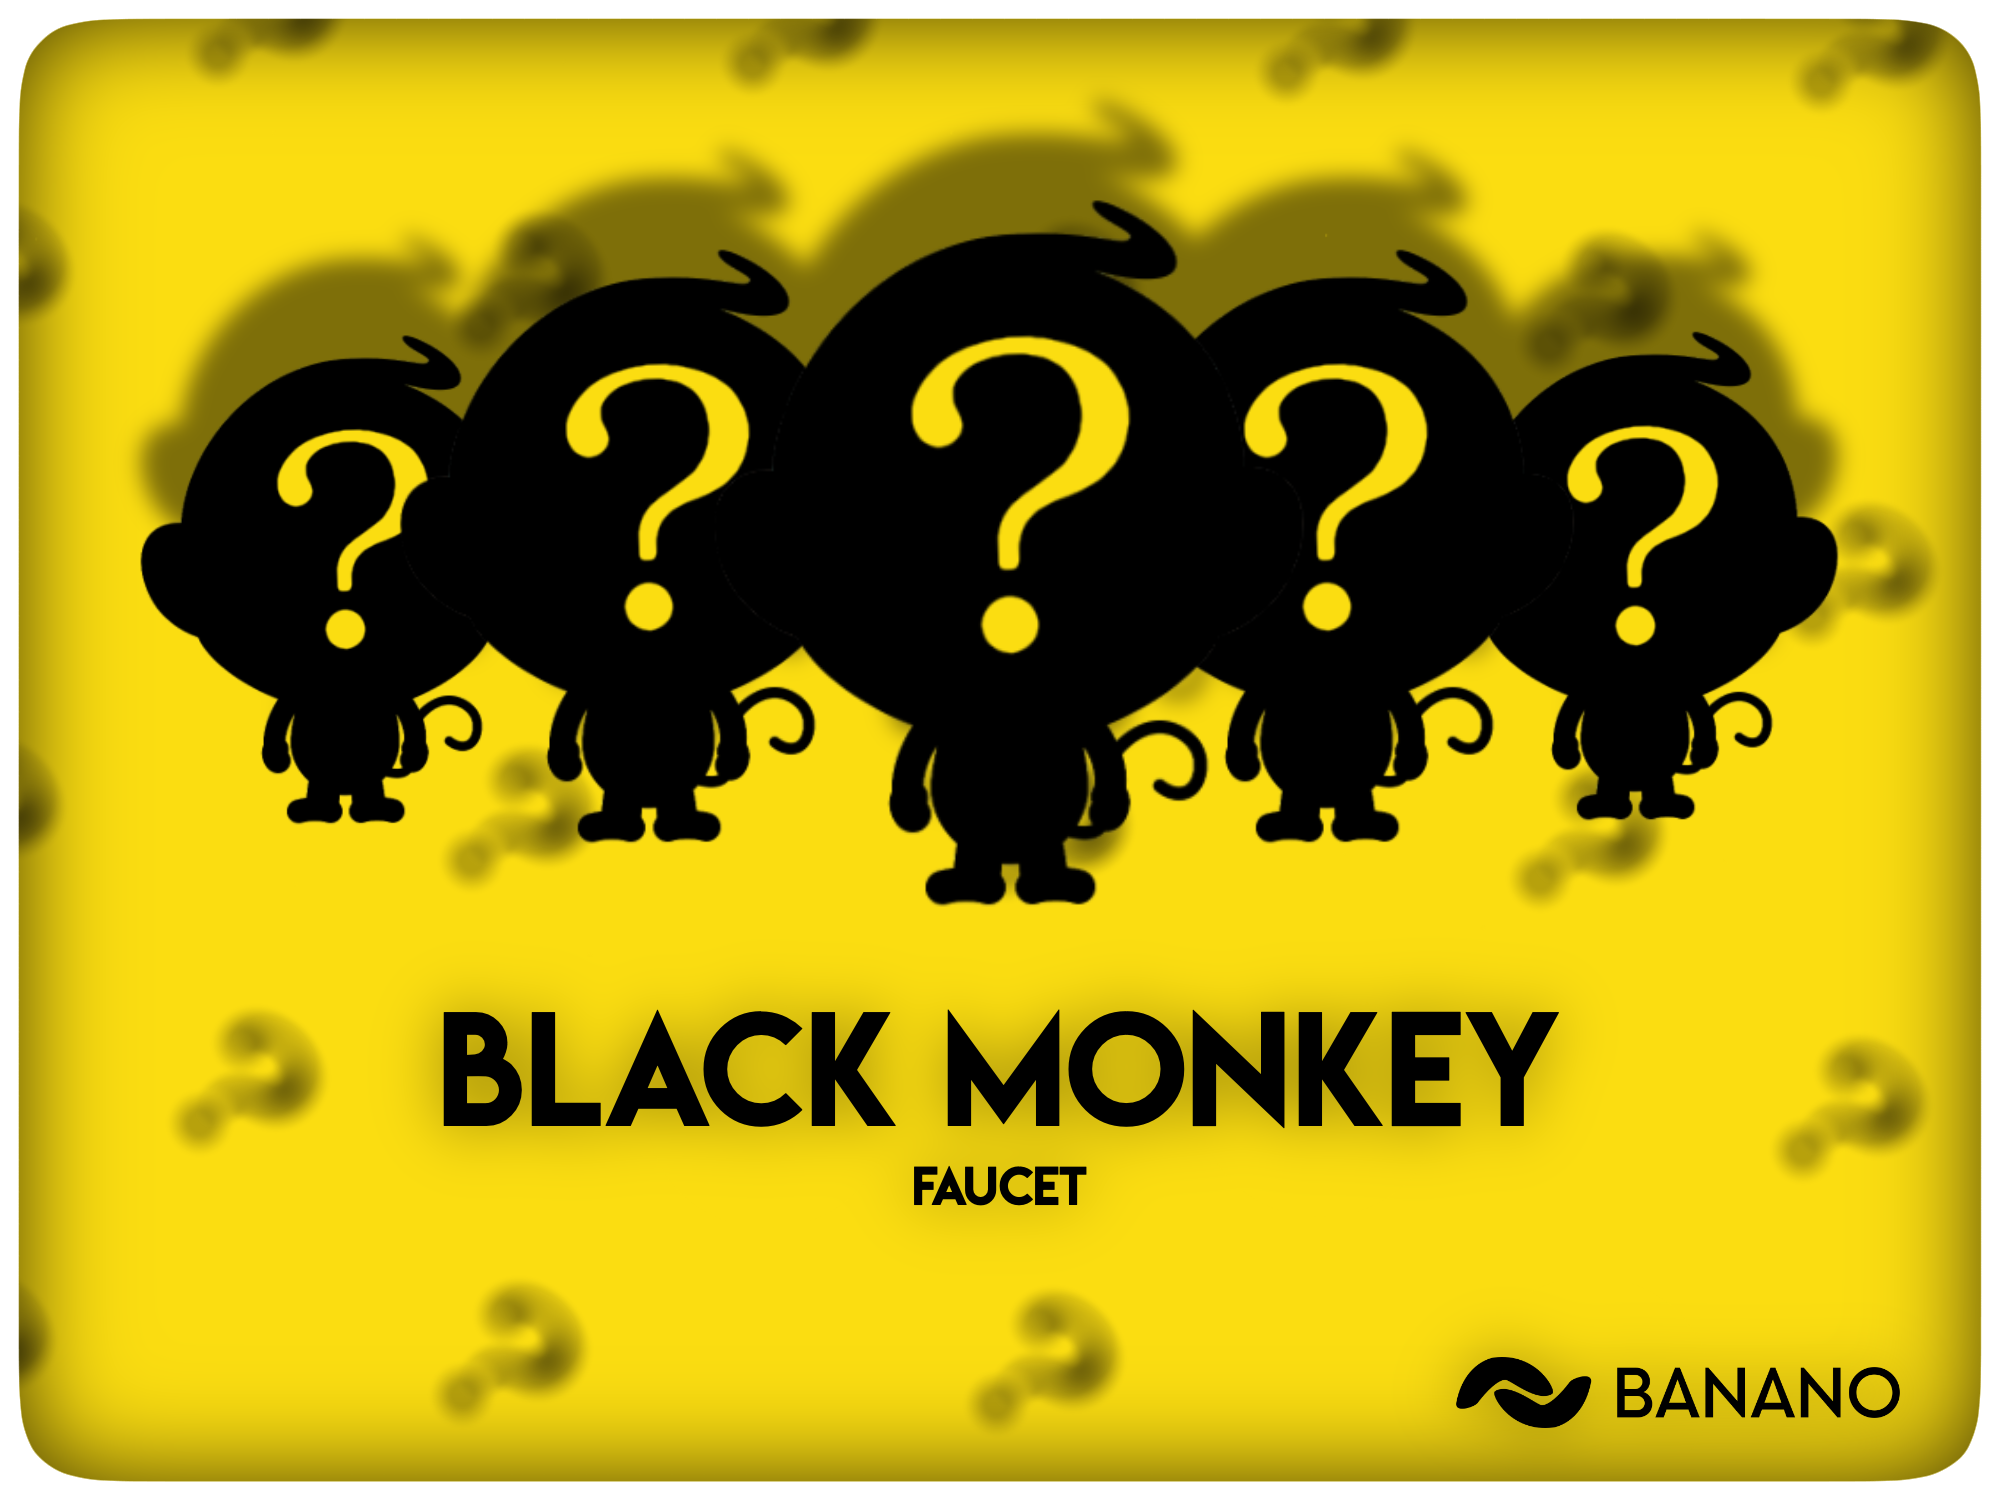 BANANO Faucet Game ‘Black Monkey’ Round 14 Starts this Saturday (24 Hours Only)!